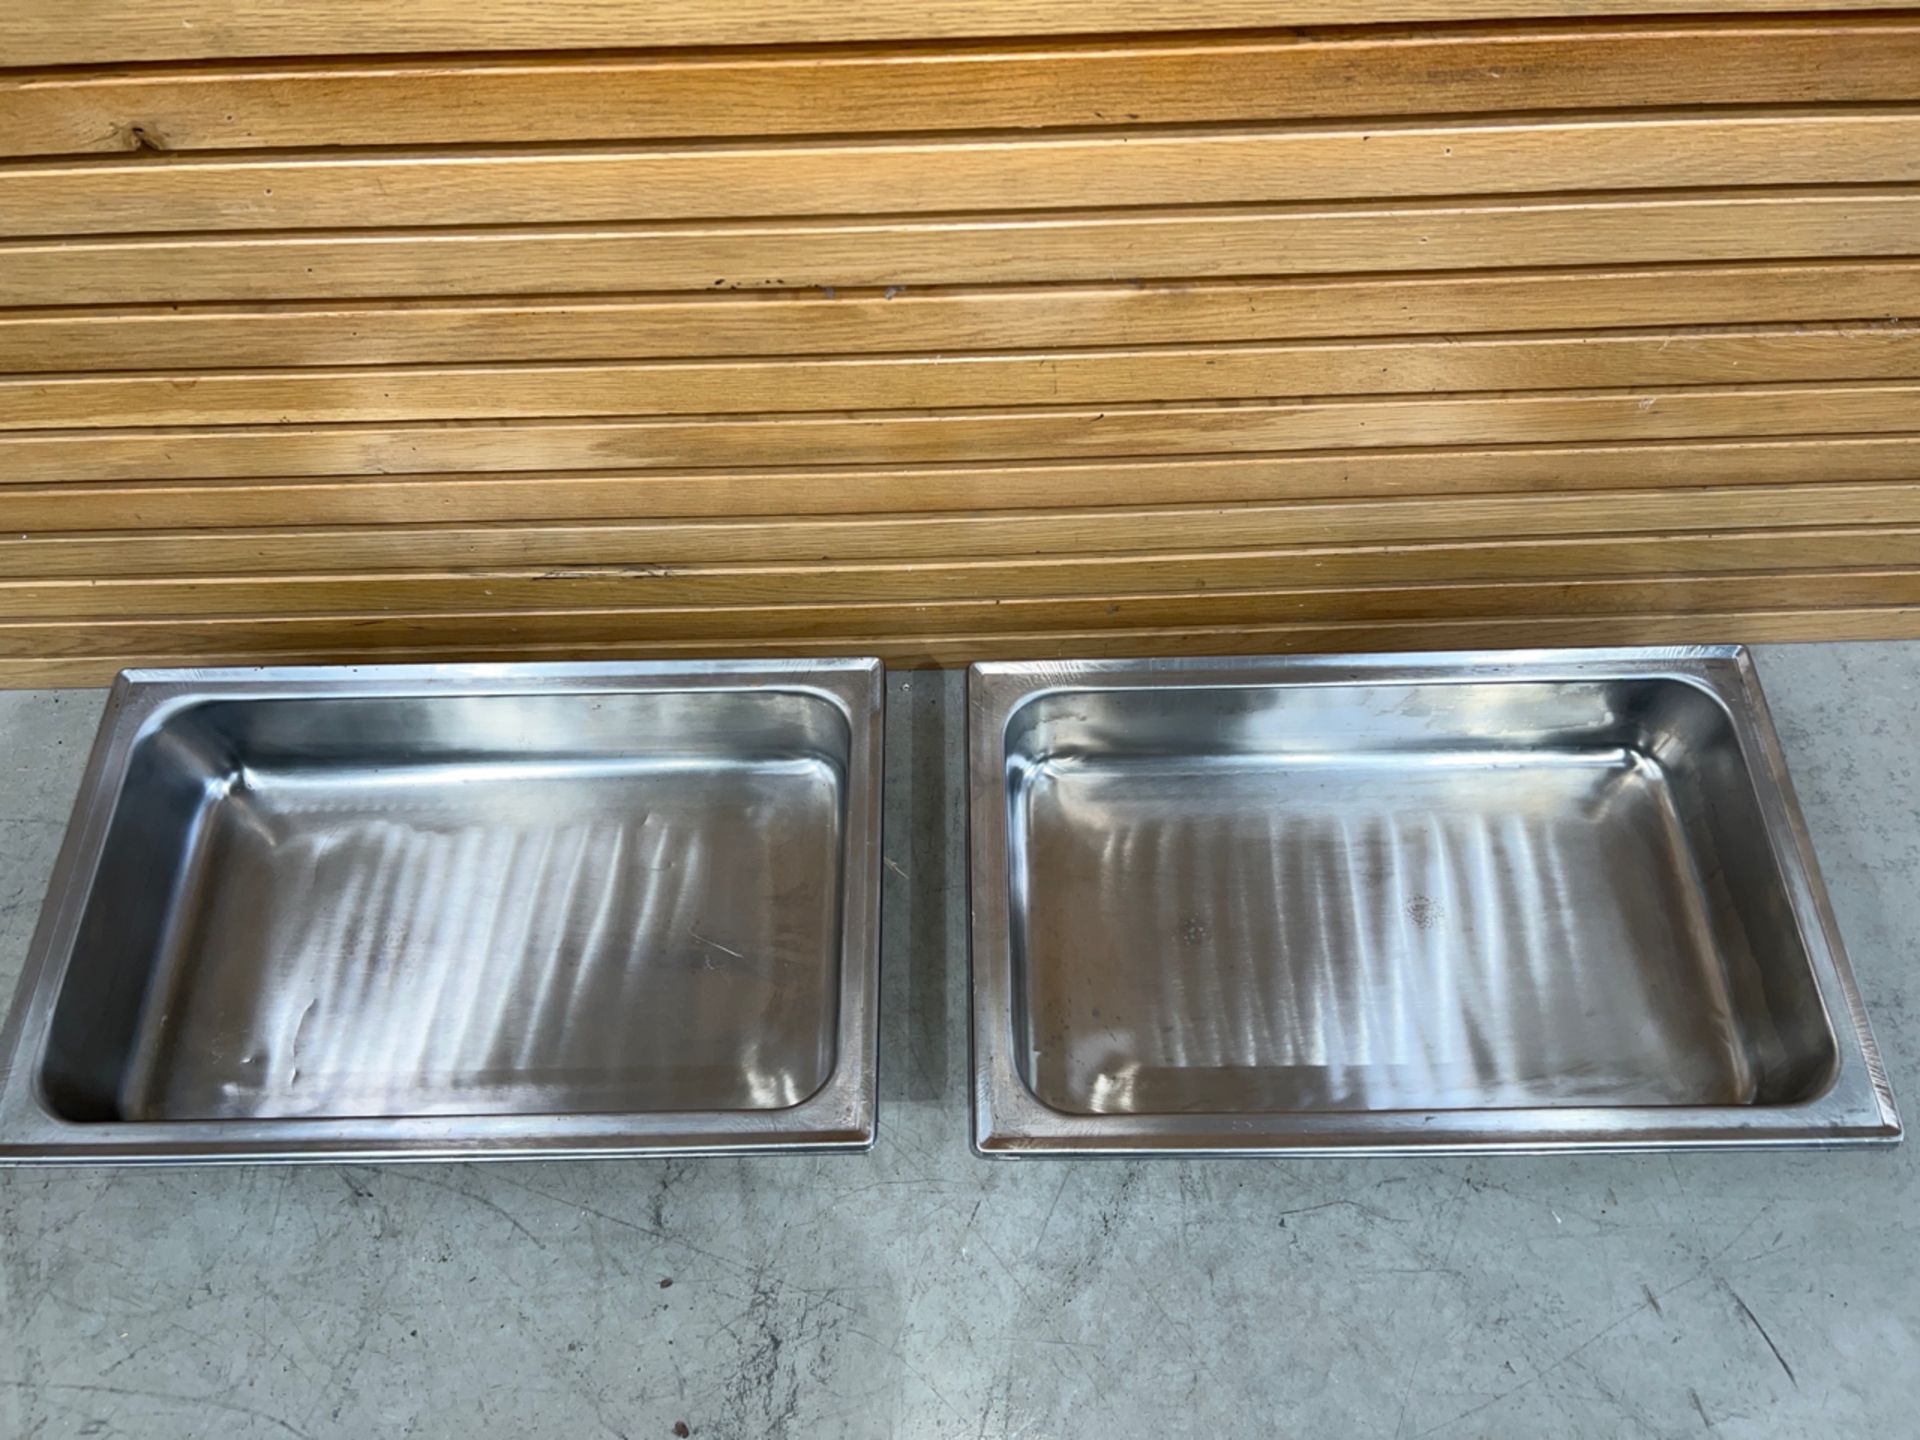 Stainless Steel Gastronorm Tray X2 - Image 2 of 3